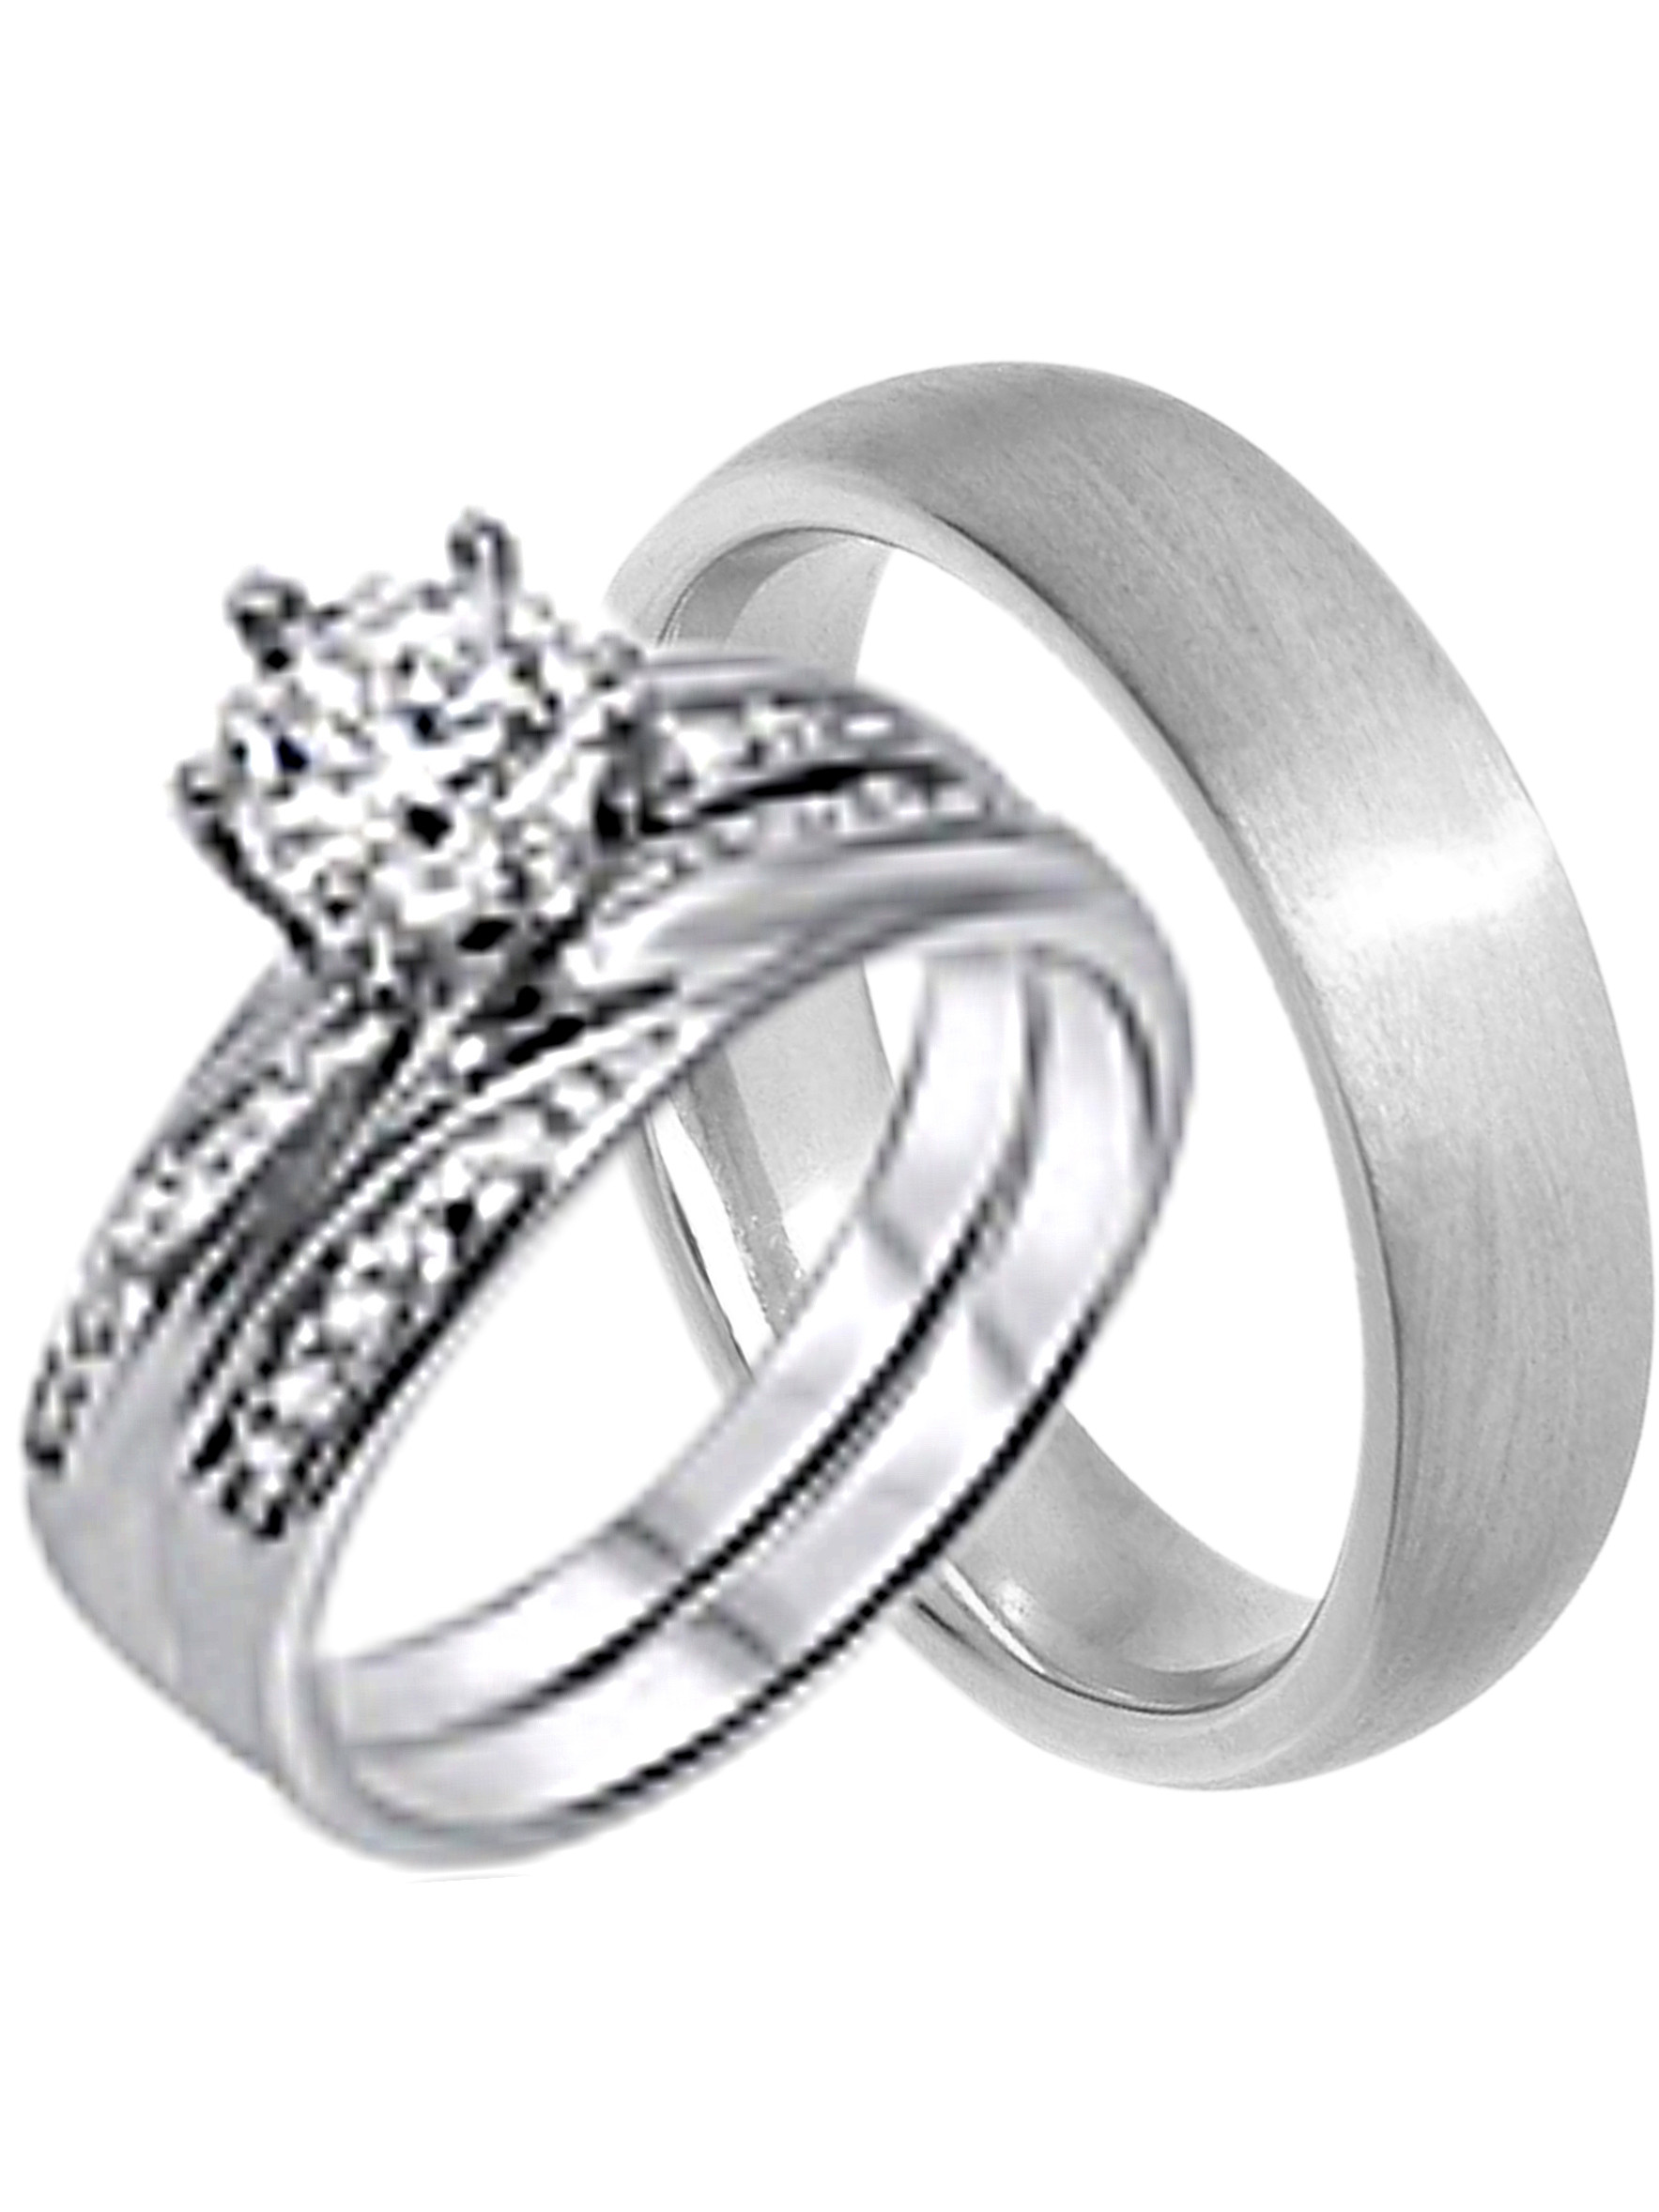 Walmart Wedding Rings For Him
 His and Hers Wedding Ring Set Cheap Wedding Bands for Him